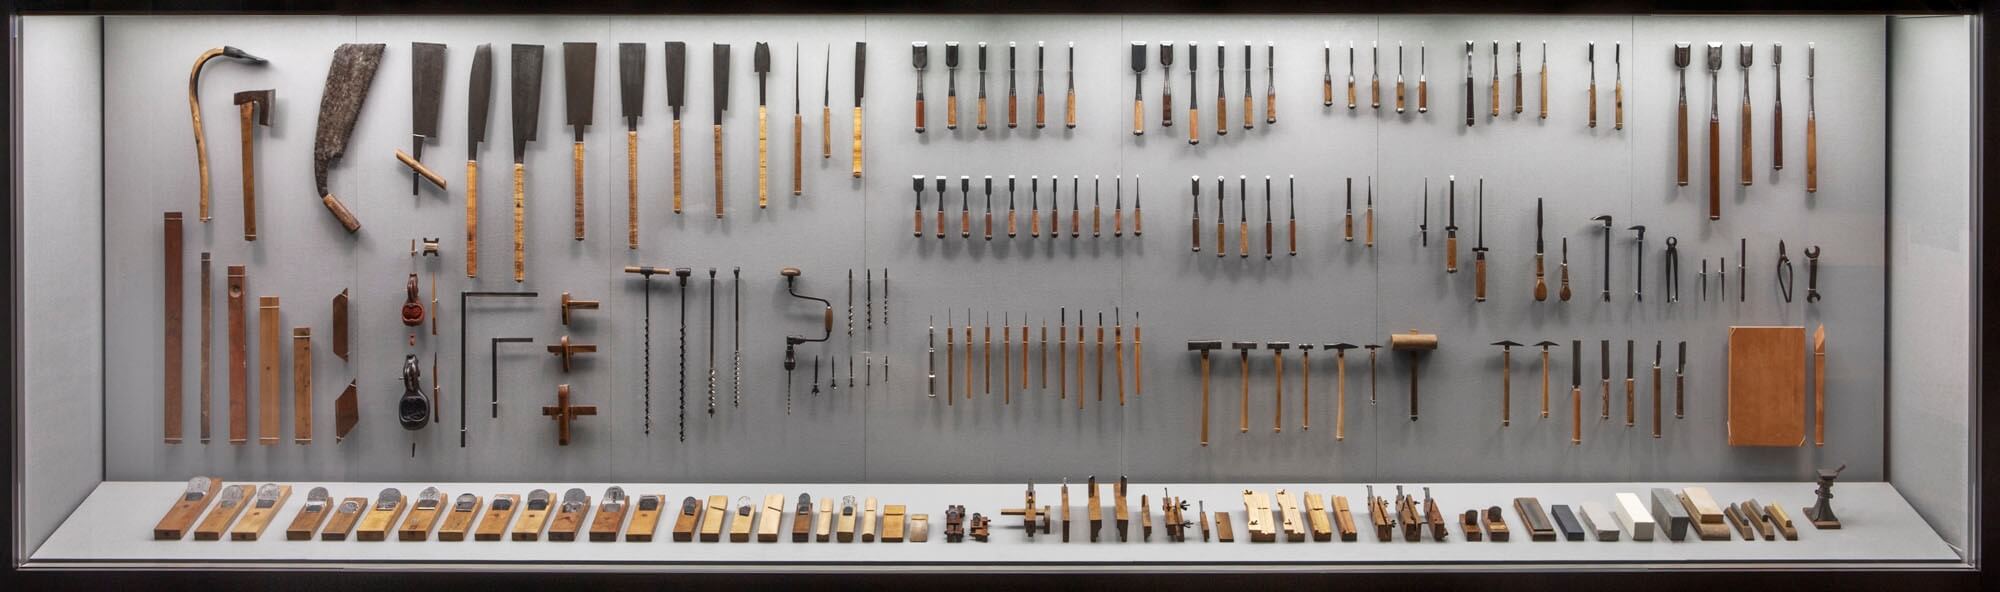 New York S Japan Society Explores The Art Behind Traditional Carpentry Tools